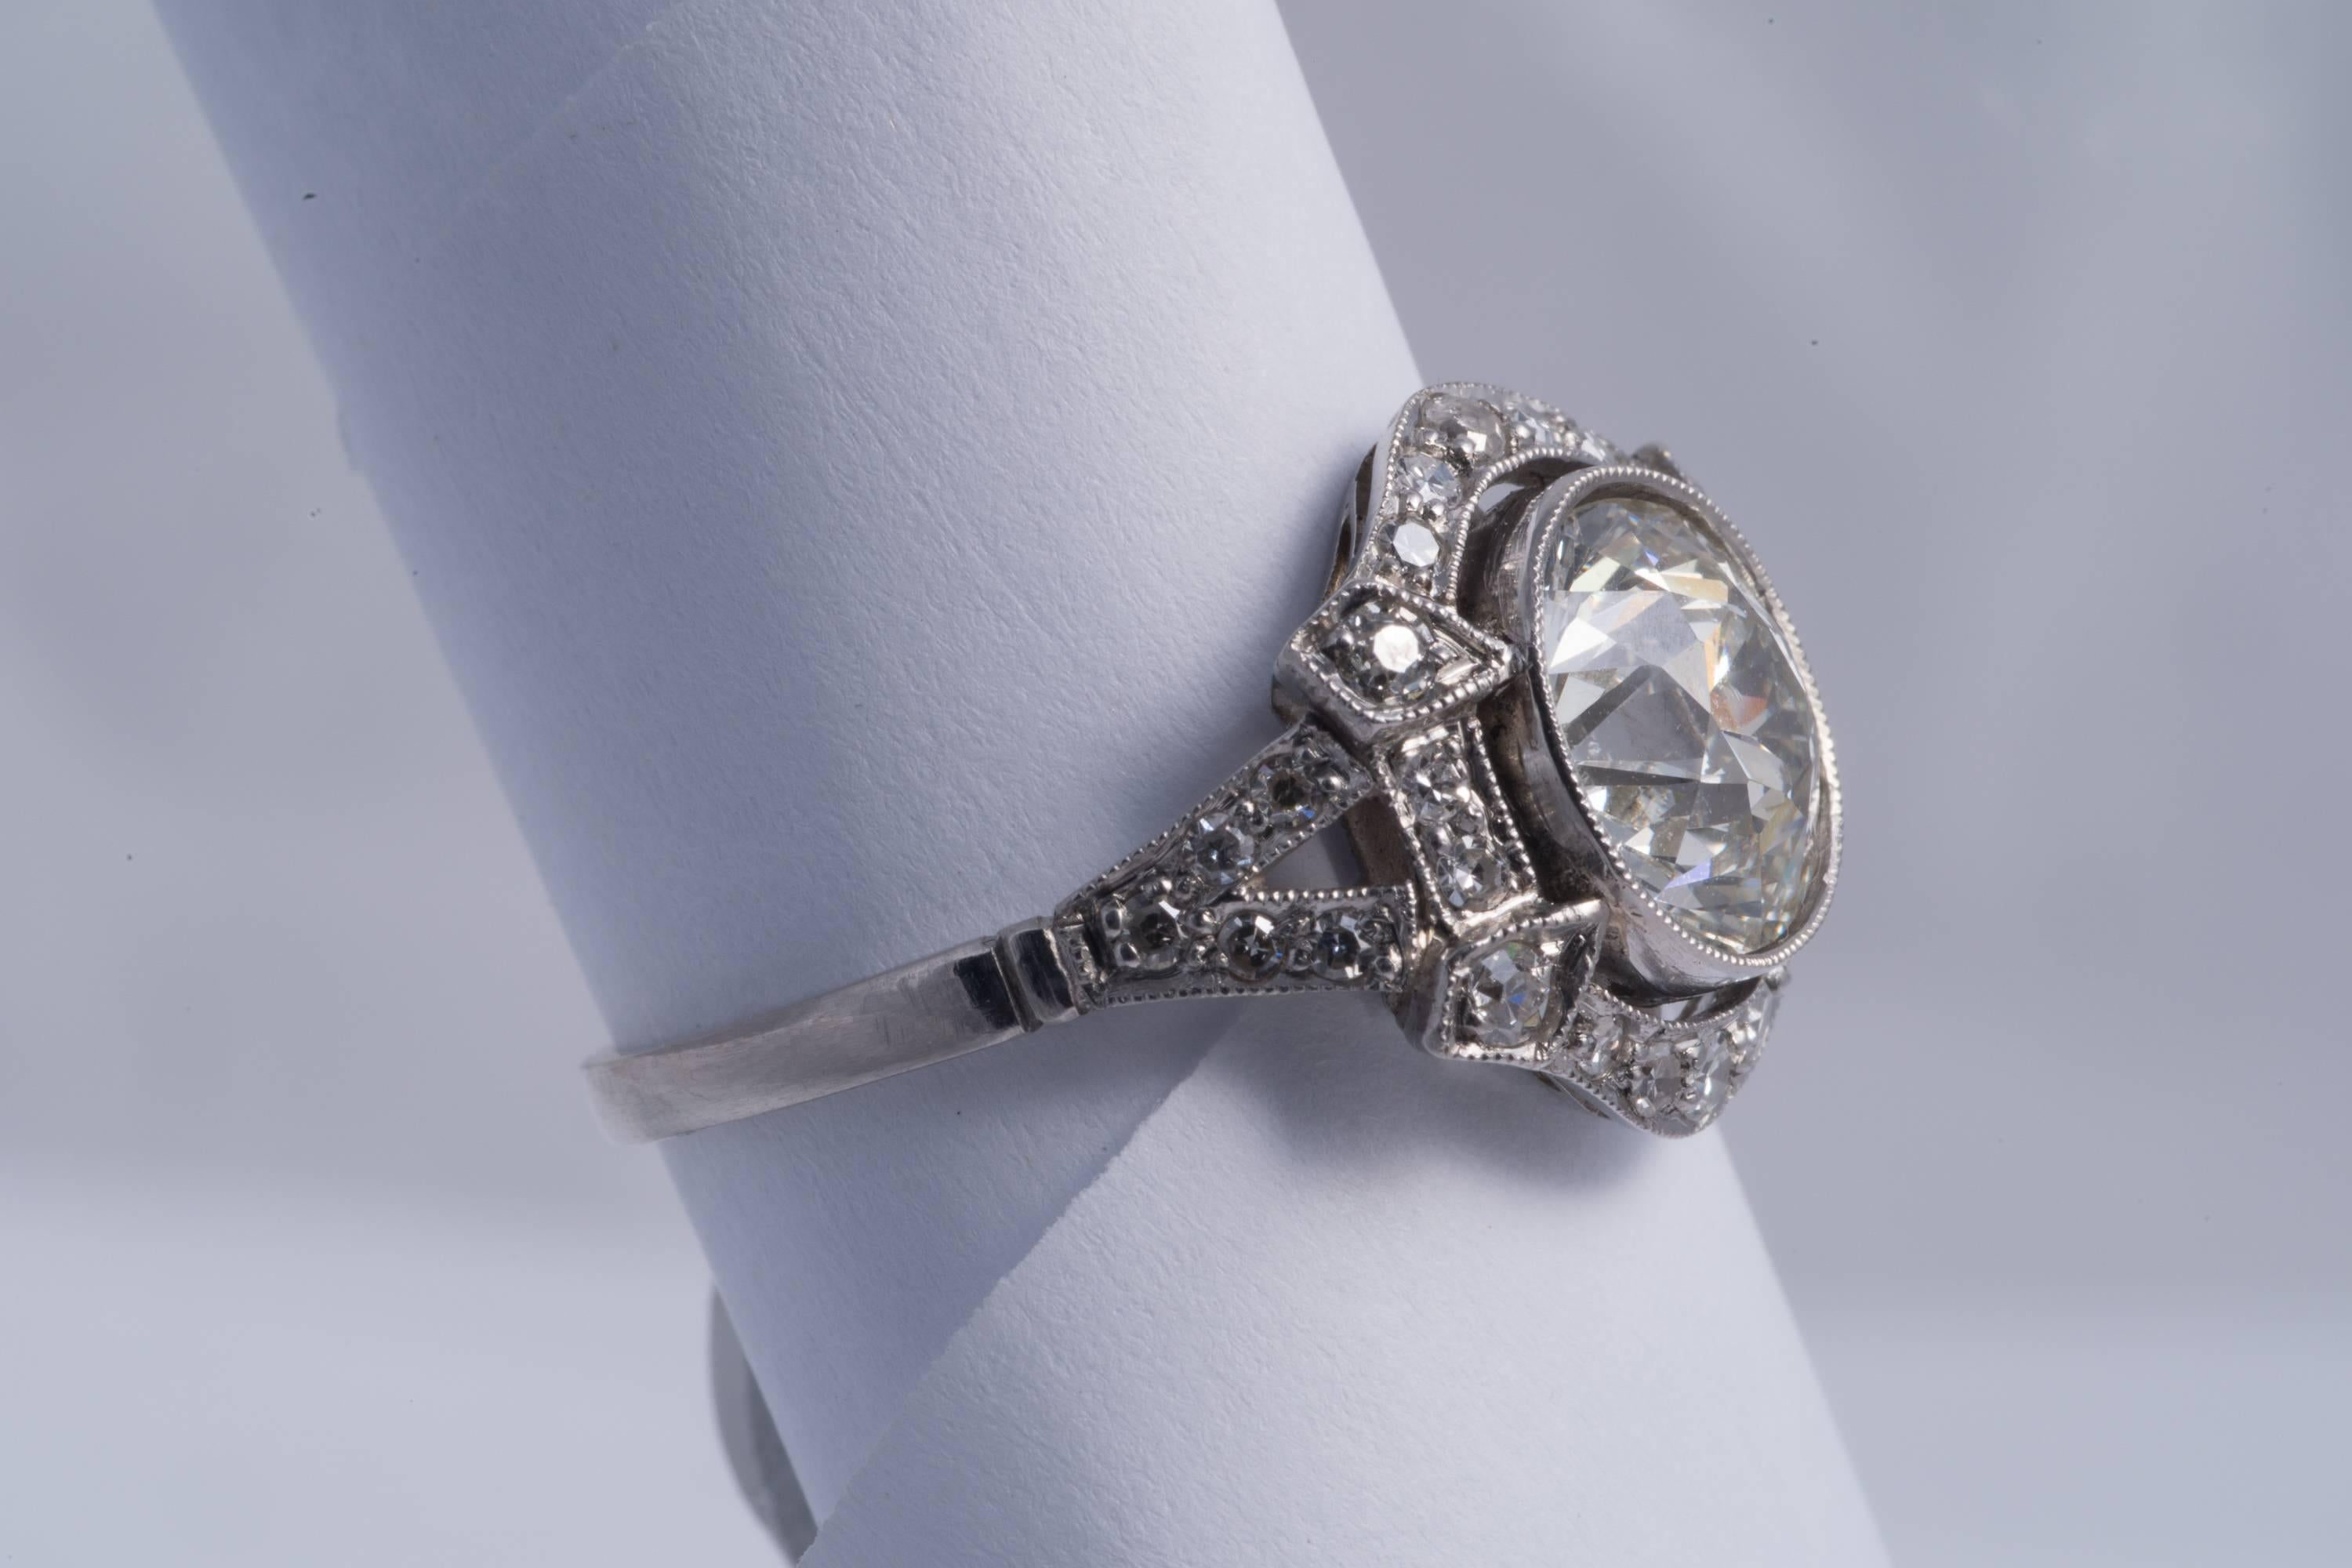 Beautiful Old Mine Cut Diamond Ring in Platinum Center Diamond 2.75 cts VS2 H-I color.
There are 28 single cut diamonds approx. 1.00 cts. VS clarity, G-H color. 